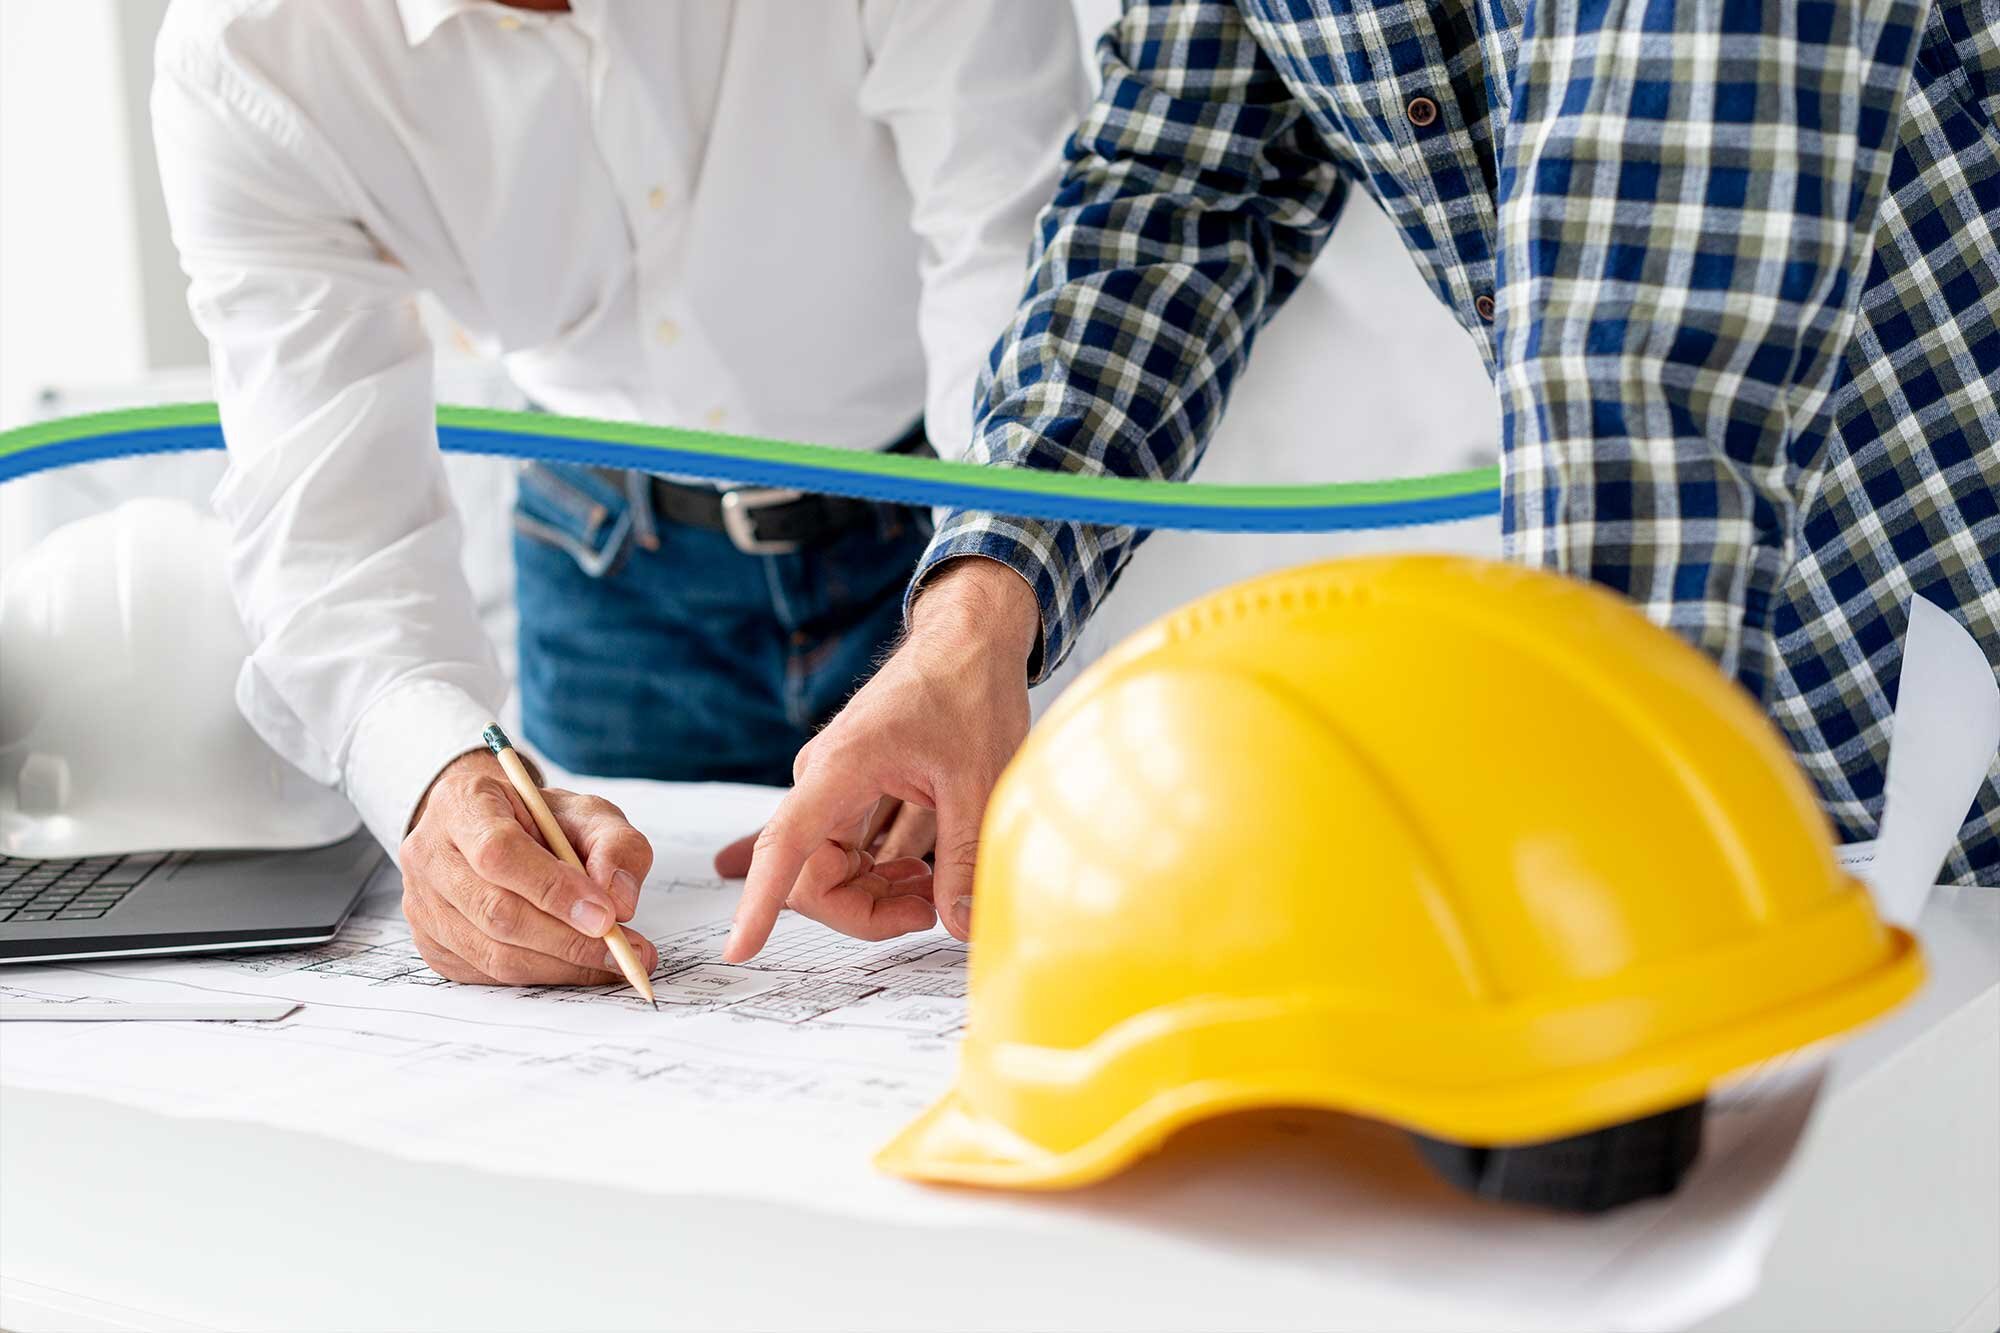   Planning &amp; Building Services     Find out more here   